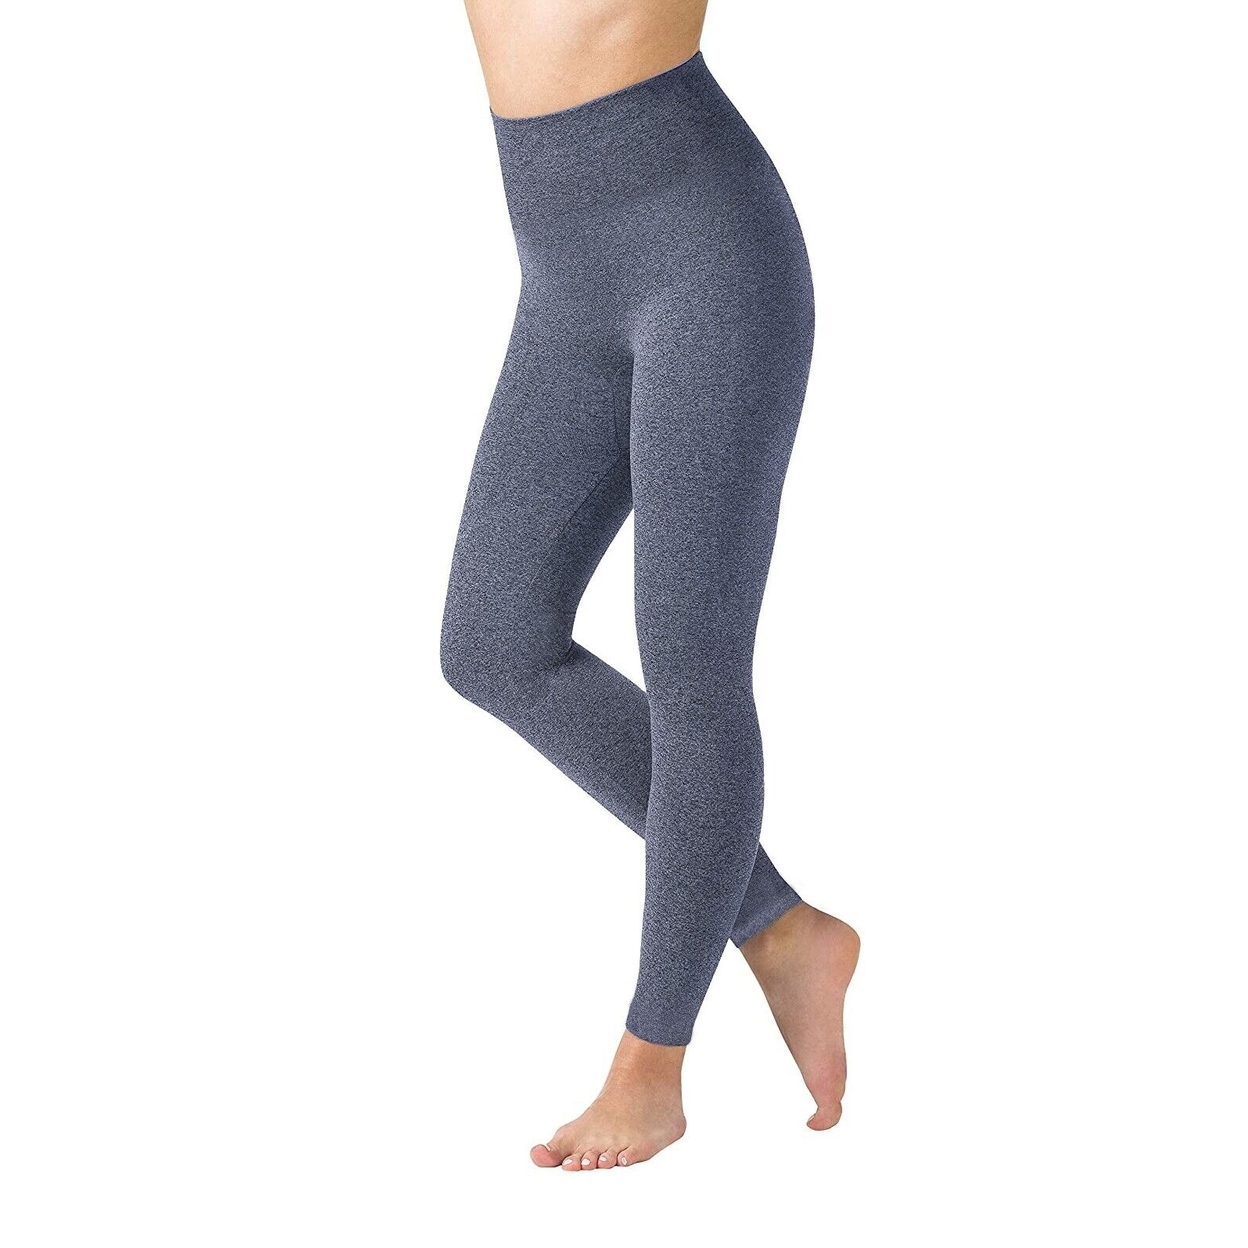 Women's Winter Warm Marled High Waist Fleece Lined Thick Thermal Leggings Pants - Navy, Large